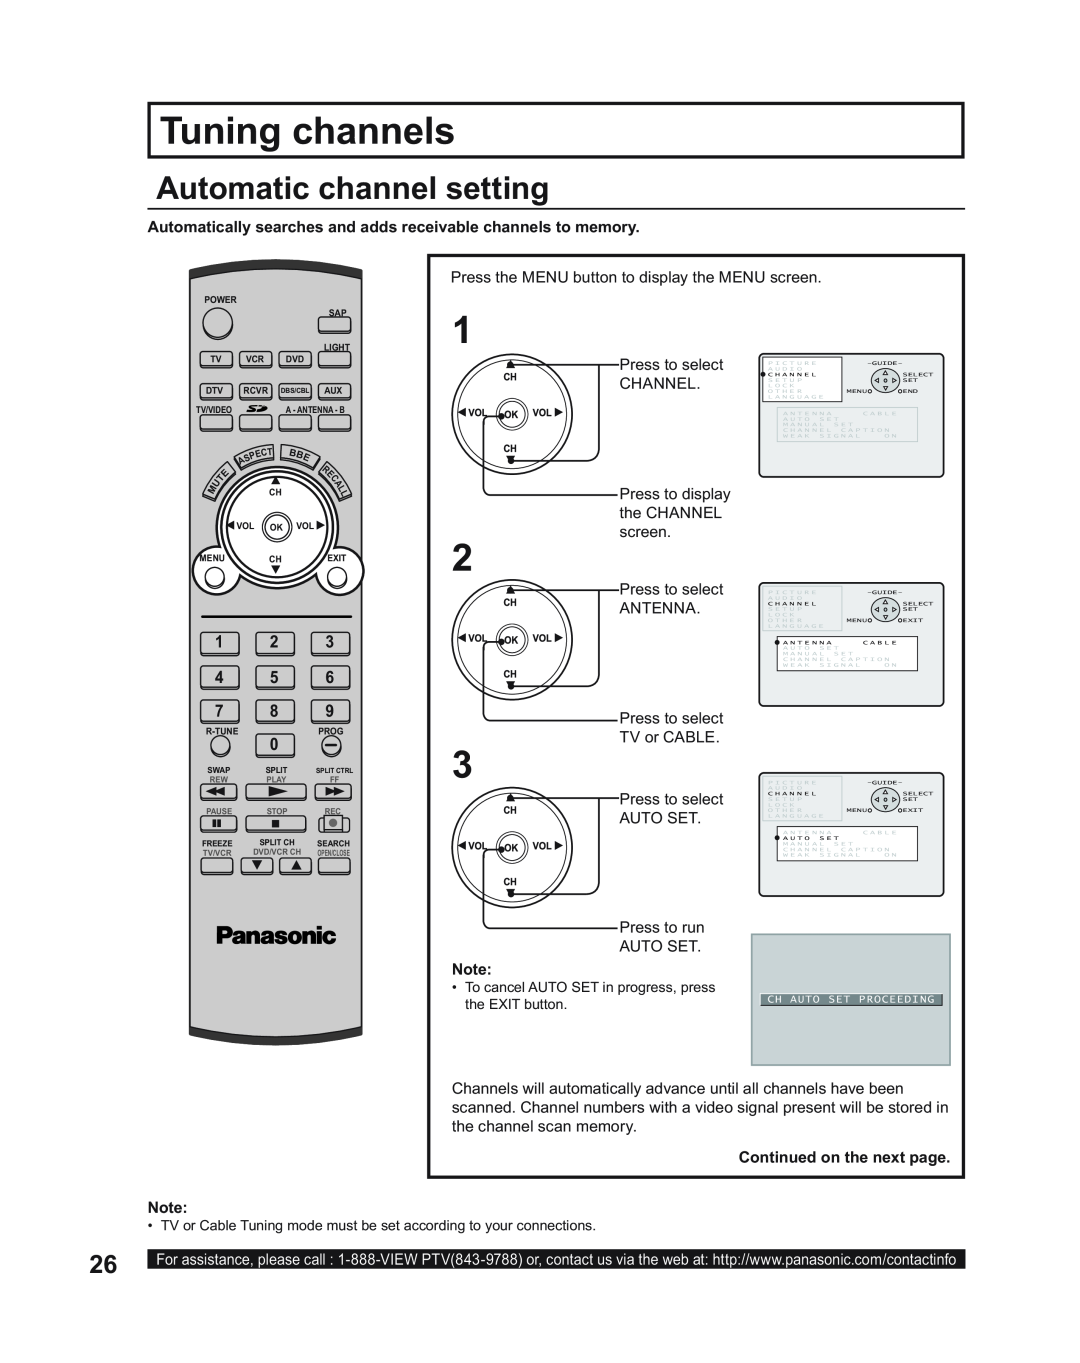 Panasonic PT-60LC14 Tuning channels, Automatic channel setting, Continued on the next page, Ch Auto Set Proceeding, R-Tune 